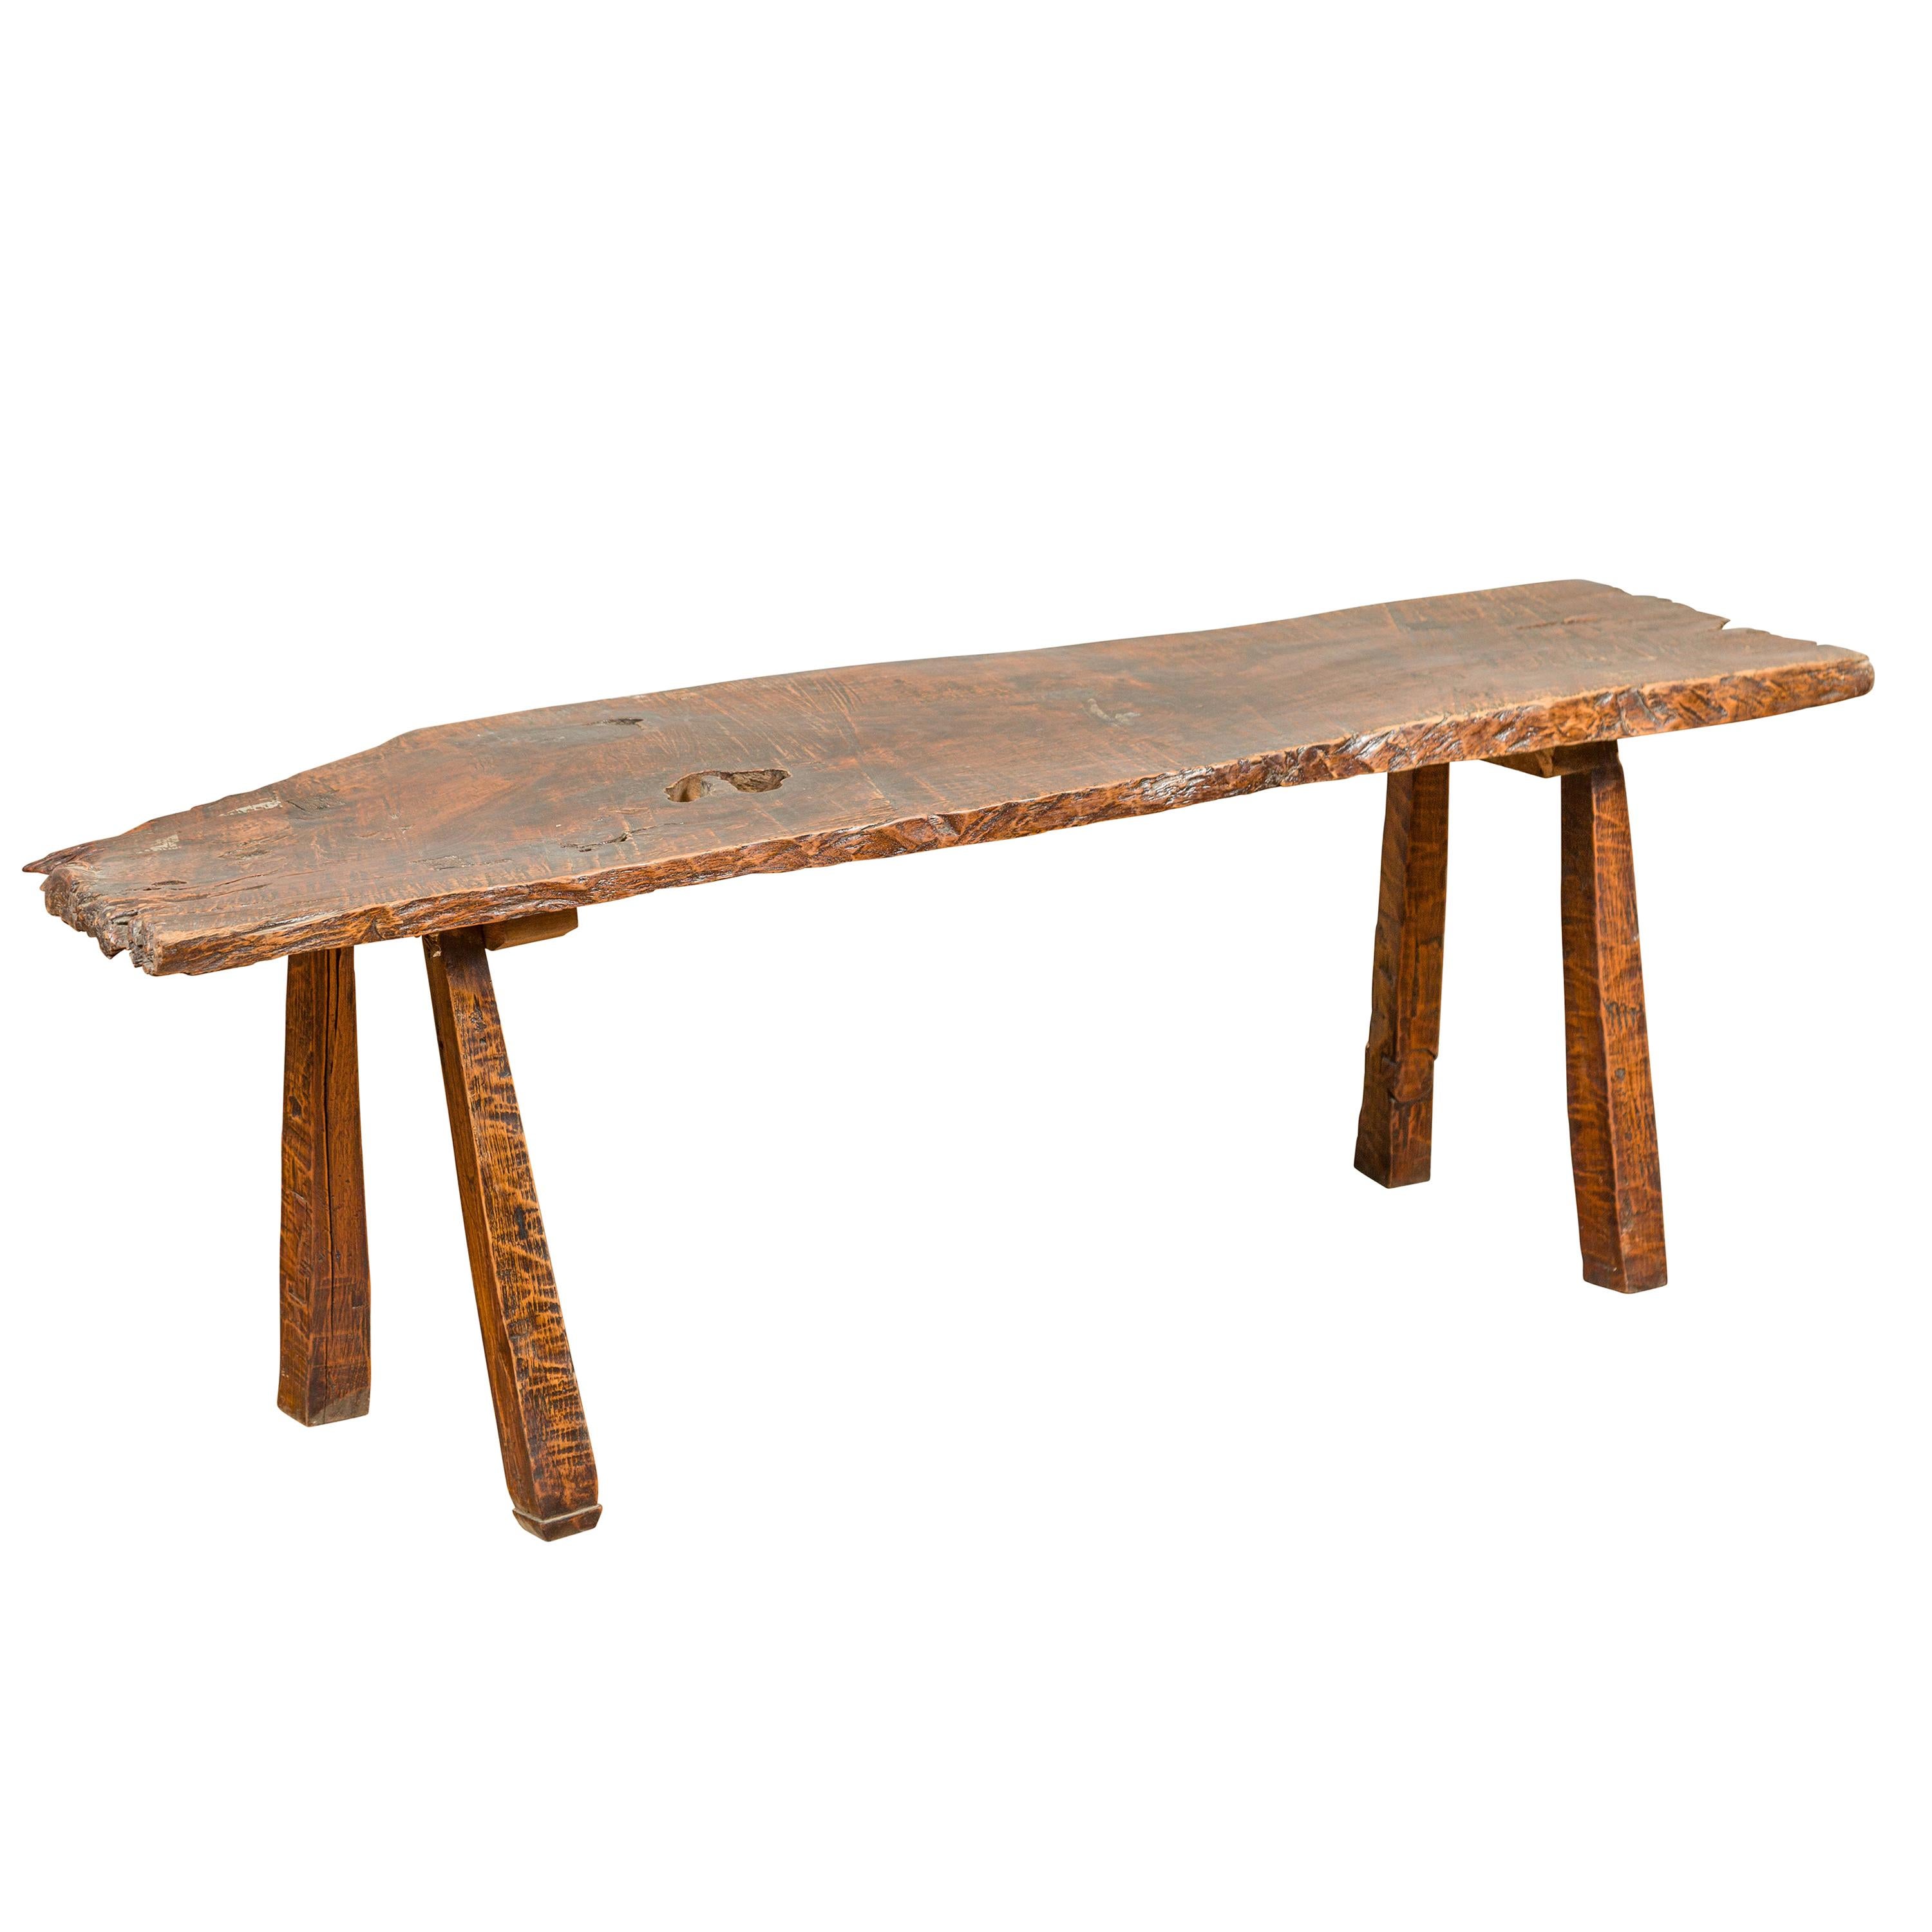 Rustic Driftwood Bench with Weathered Appearance and Splaying Legs